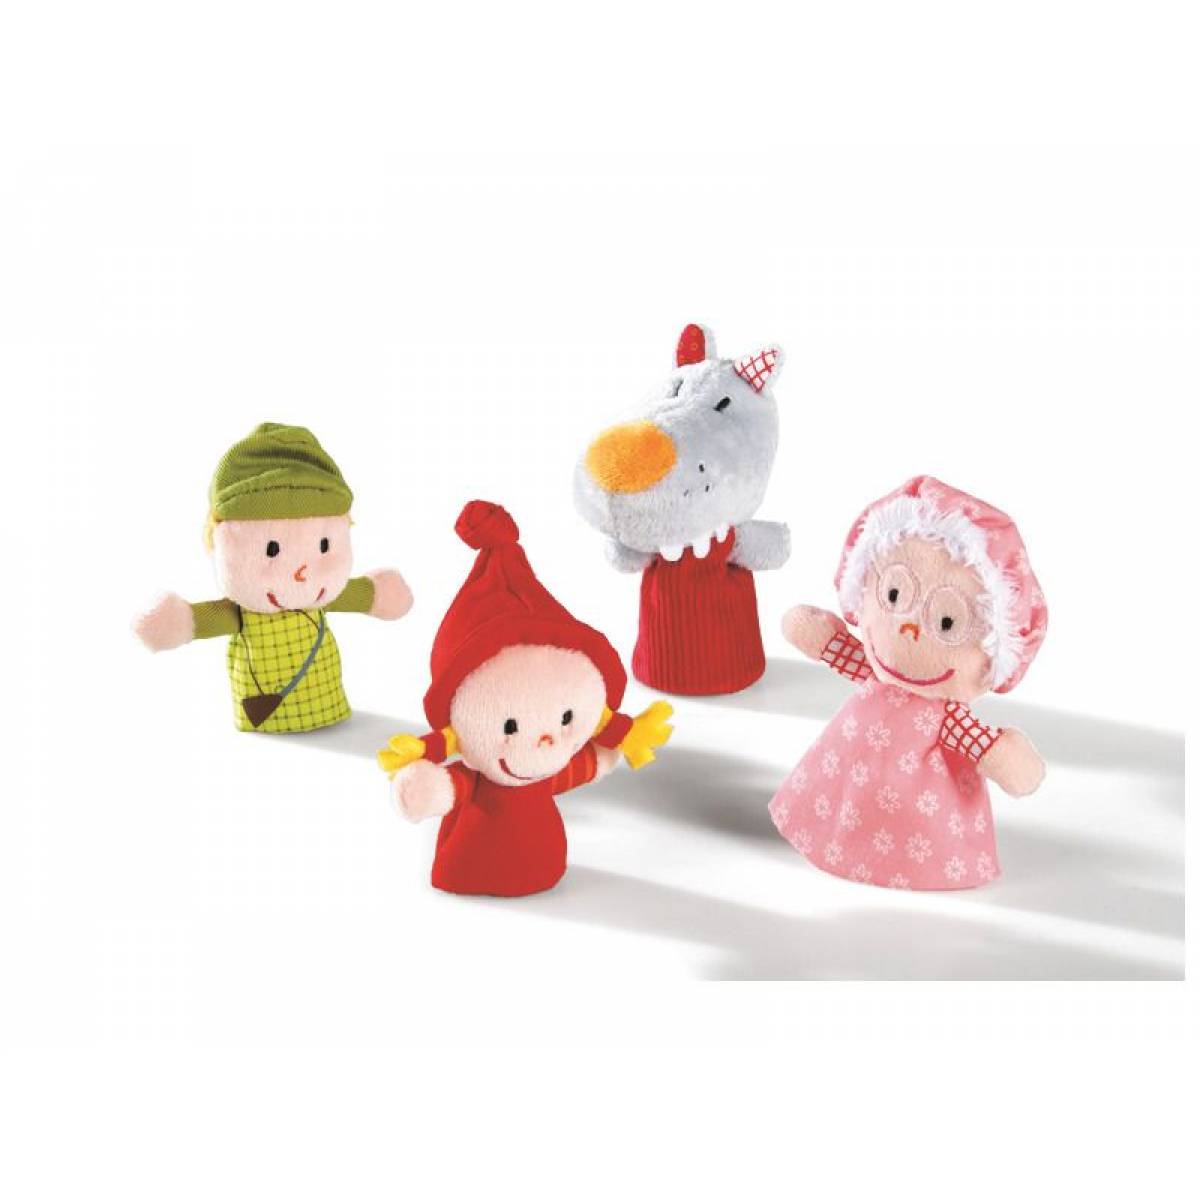 Little Red Riding Hood Puppets